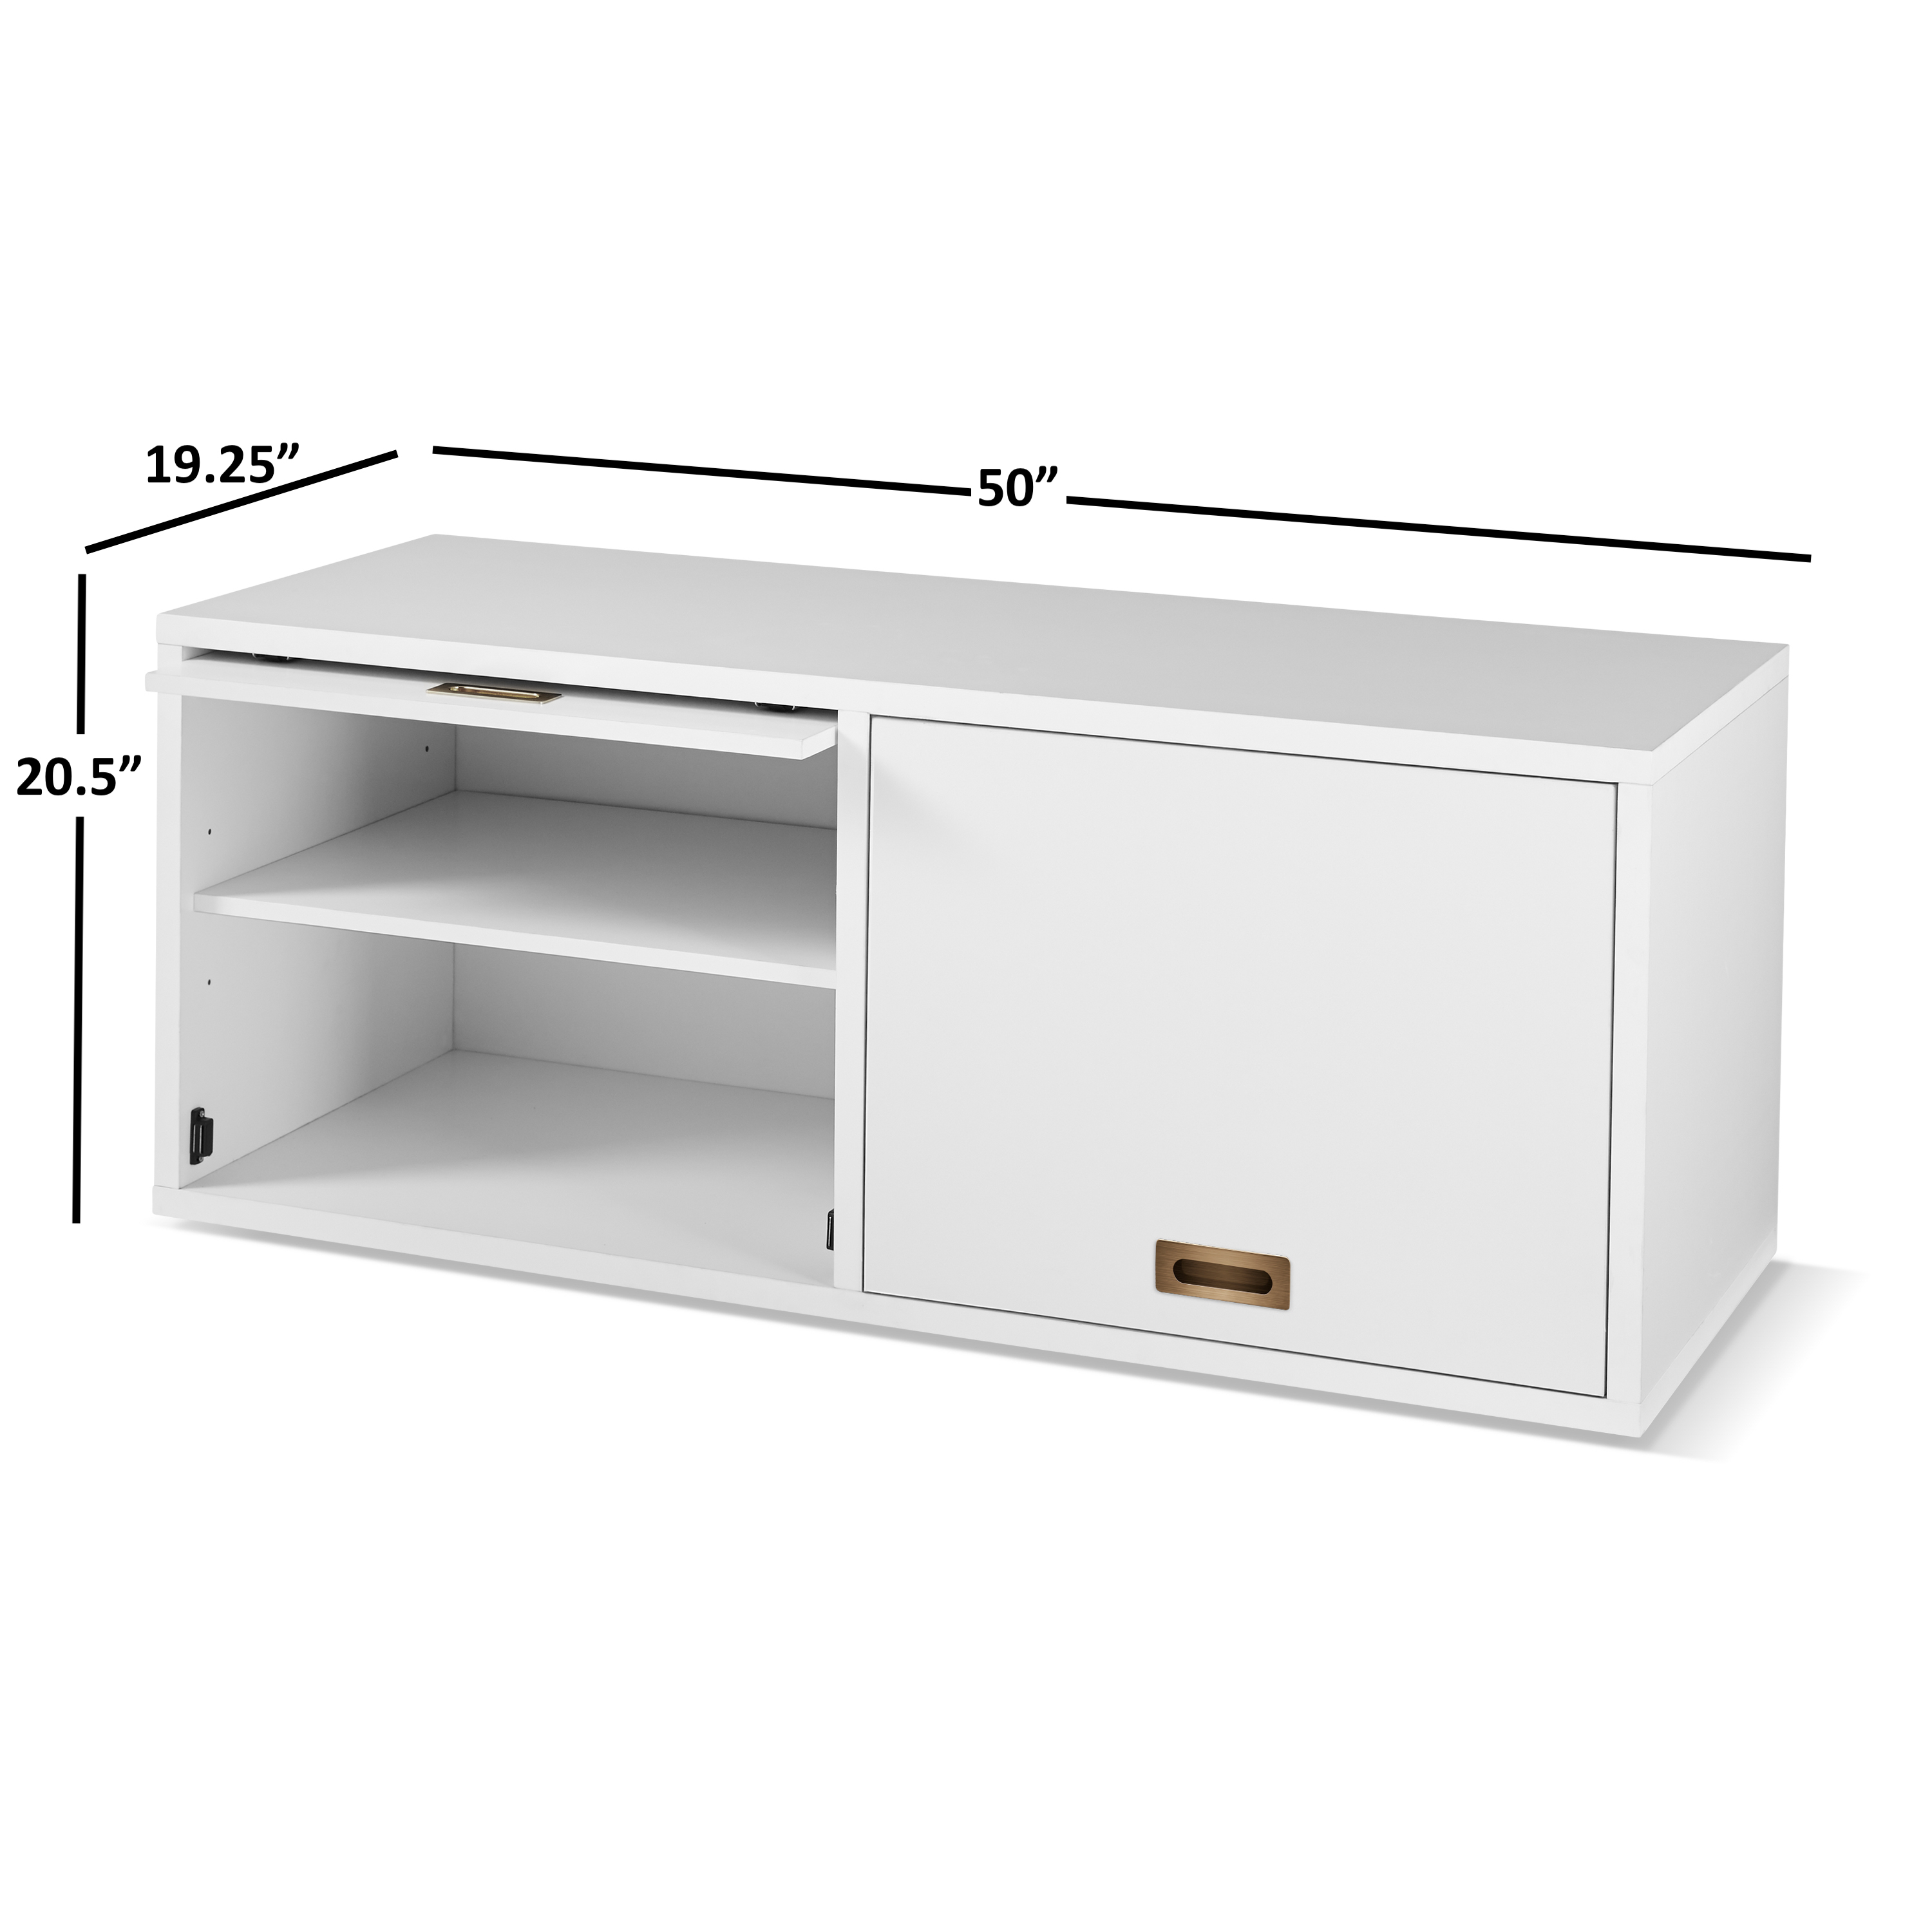 Better Homes & Gardens Ludlow Storage Cabinet with Adjustable Shelves, White - image 3 of 8